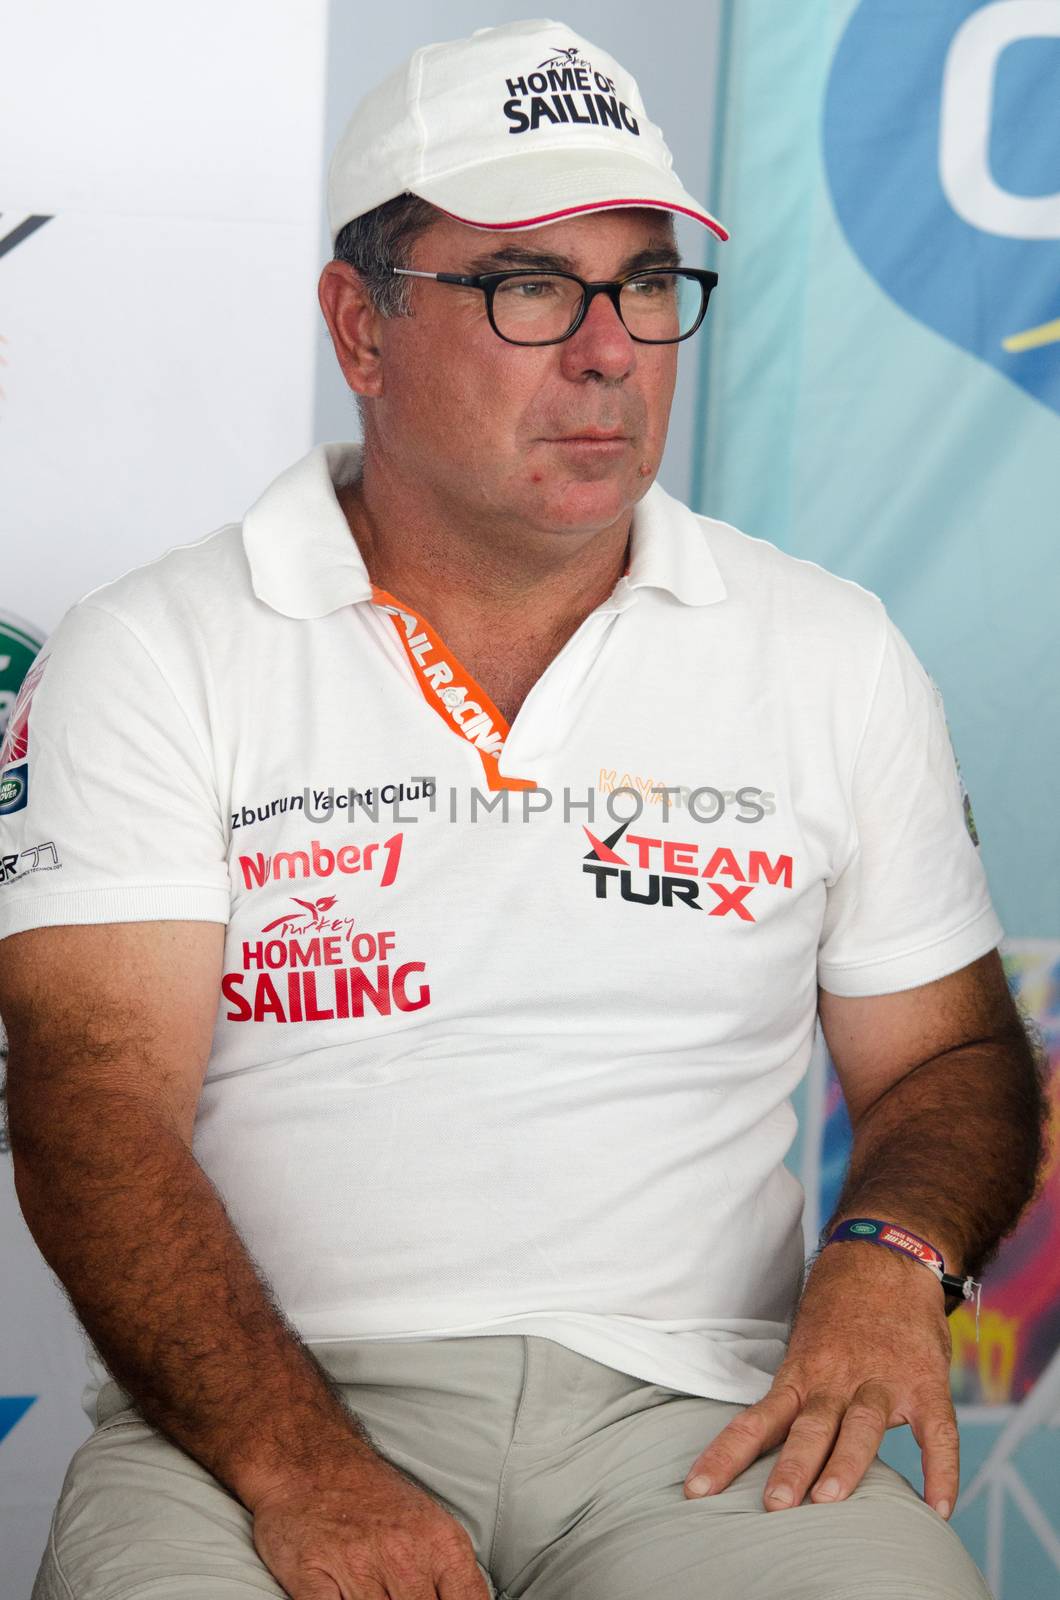 AUSTRALIA, Sydney: The Extreme Sailing Series has kicked off with a press conference in Sydney on December 10, 2015. The racing takes place over four days from 10-13 December, 2015. Mitch Booth pictured.